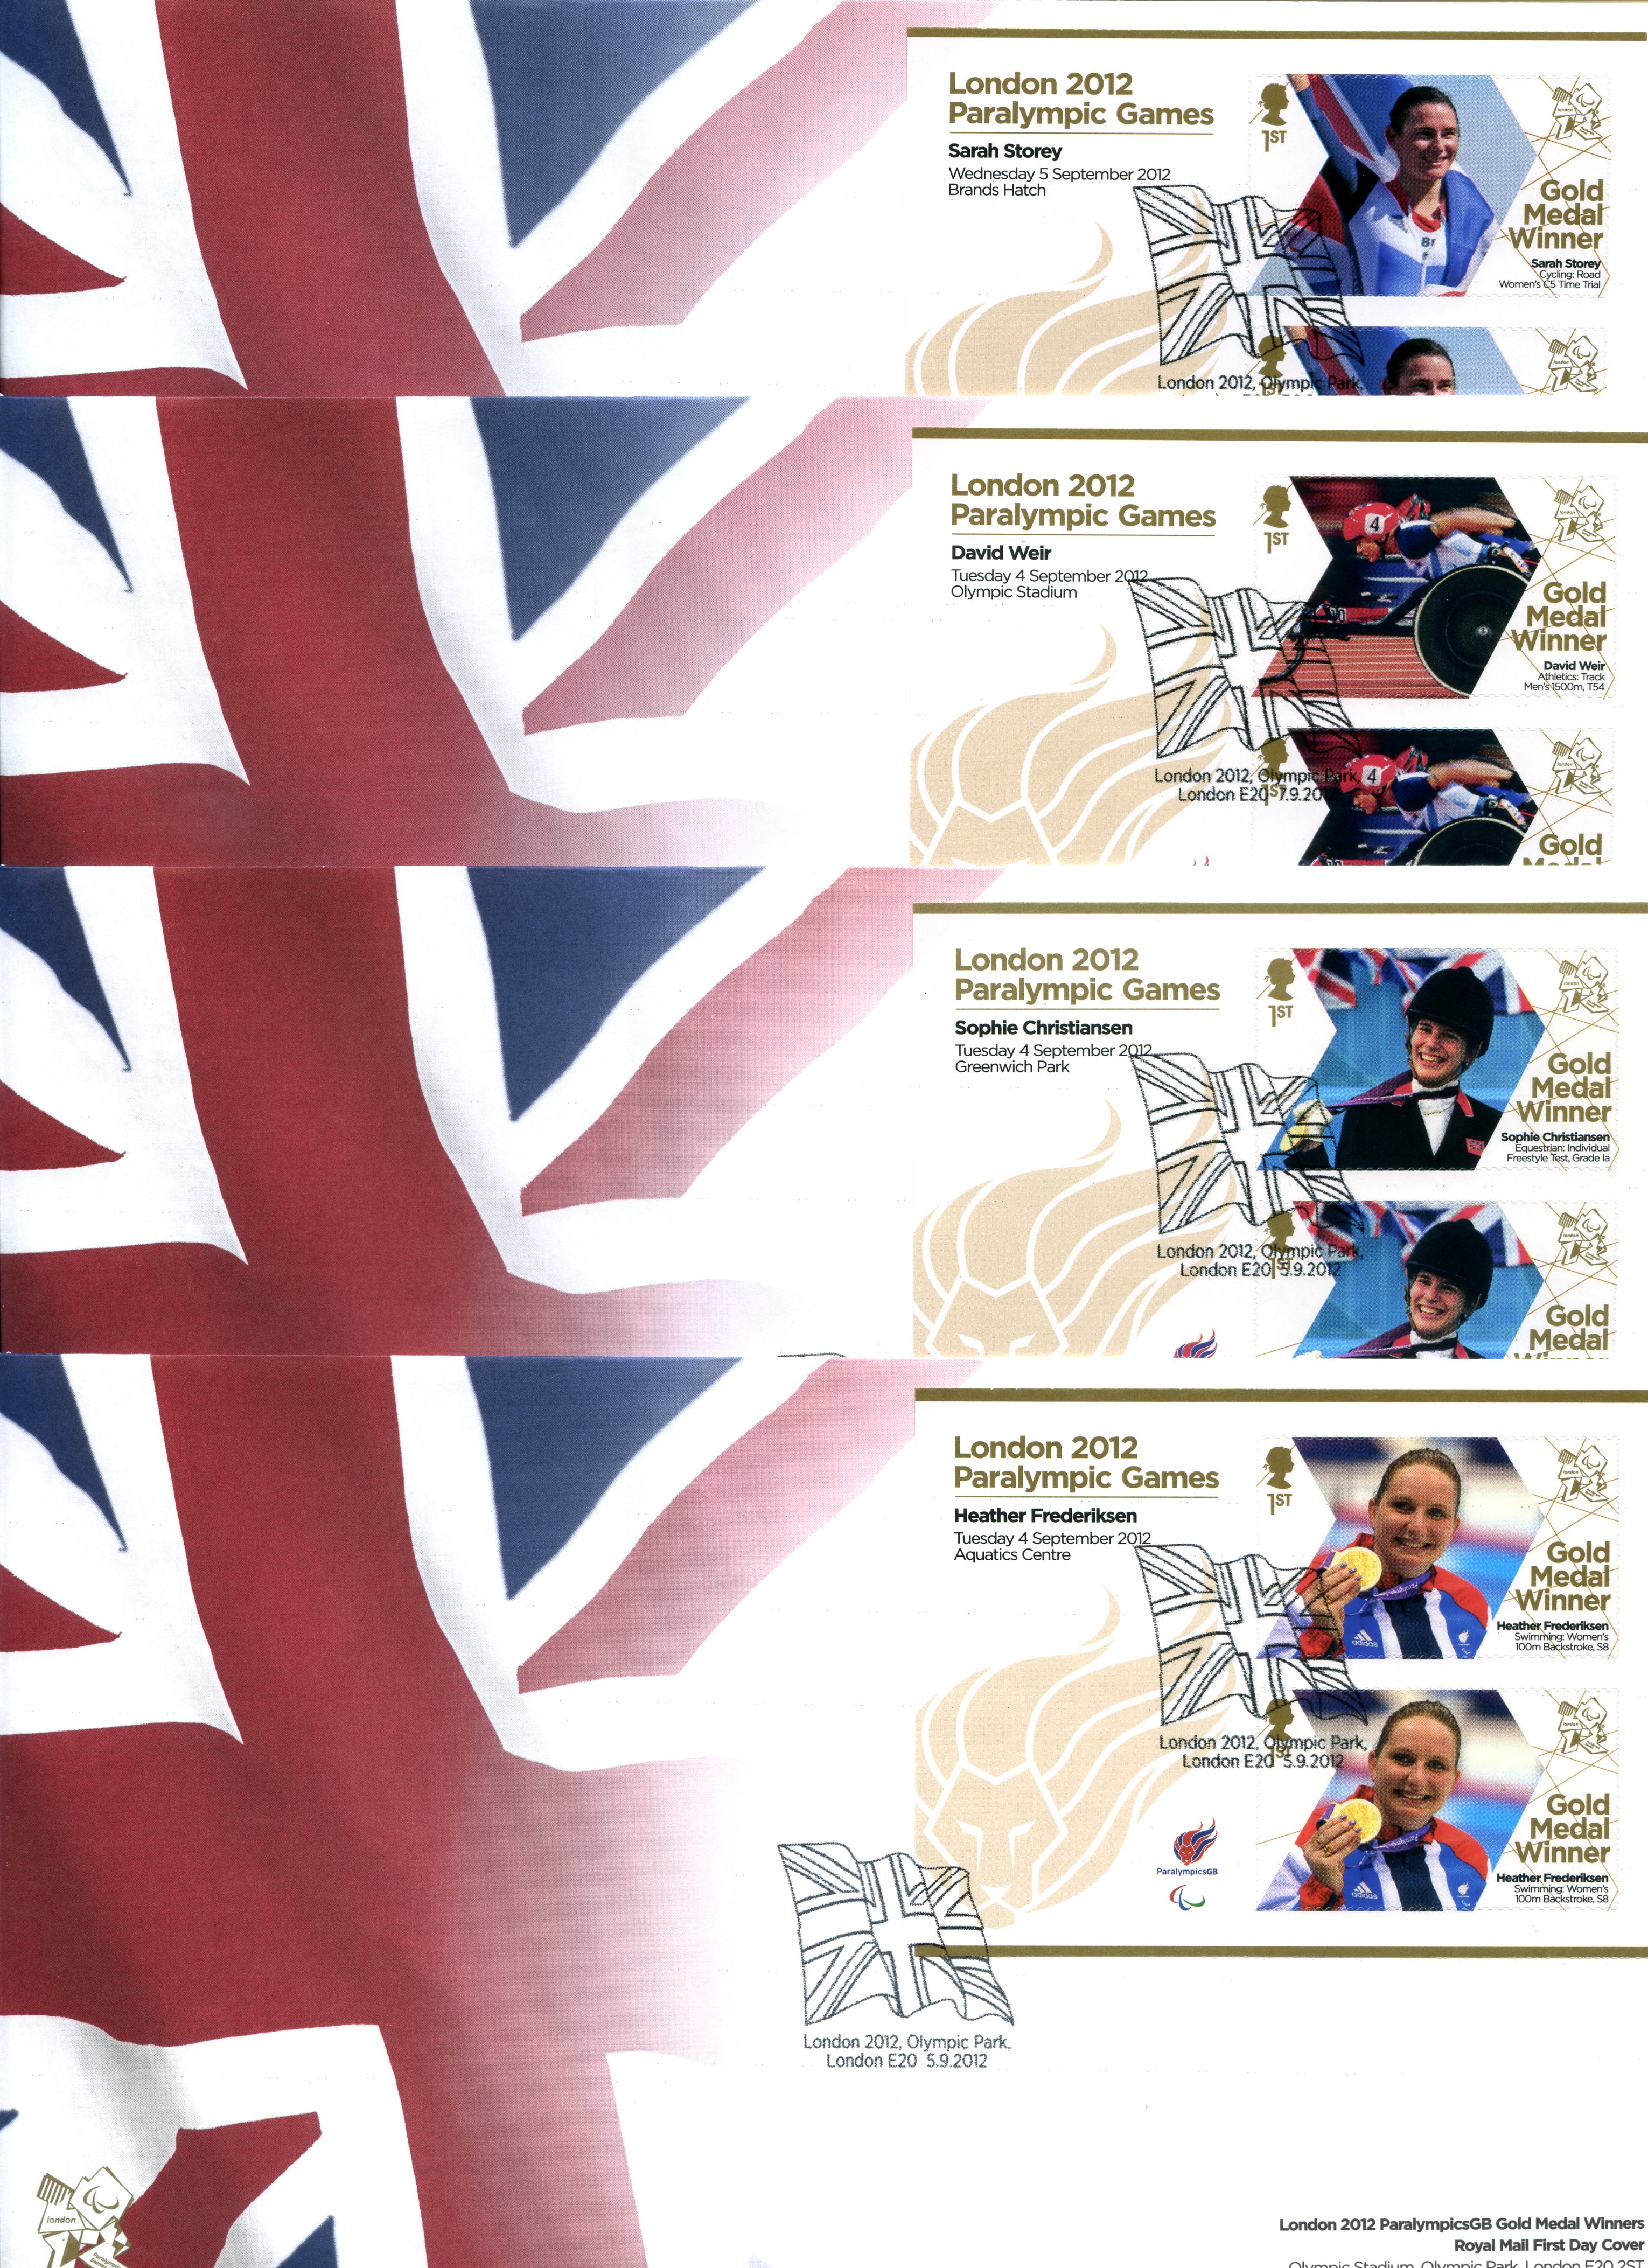 2012 LONDON PARALYMPIC GAMES - FULL SET OF 34 POSTAL COVERS - Image 4 of 9